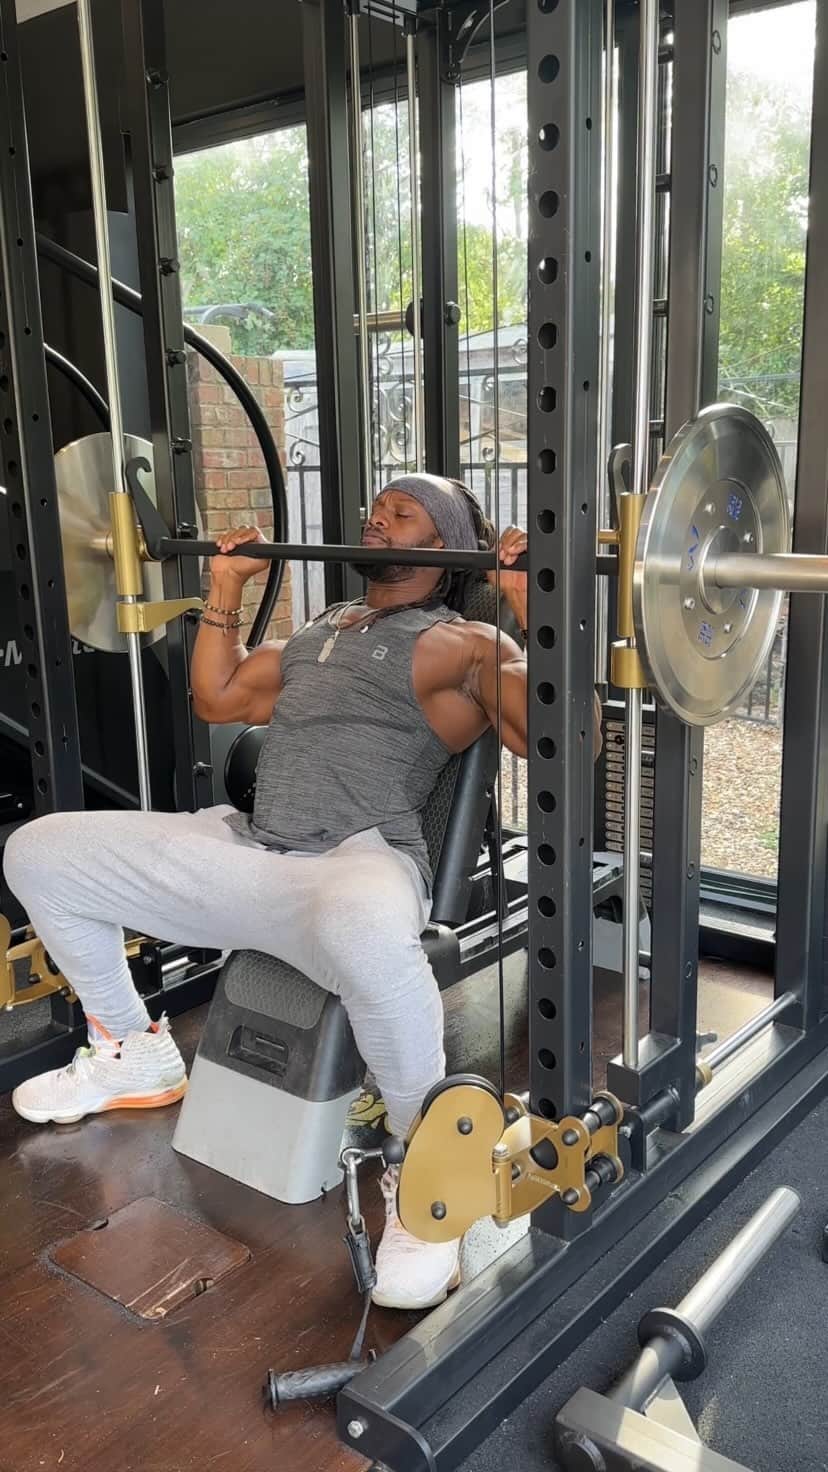 Ulissesworldのインスタグラム：「This Power Gym is all you’ll ever need from @watsongymequipment 🔥  This right here is a staple piece of equipment in my home gym 💪🏾 Three machines in one. Perfect for bench press, shoulder press, any fly move moment, body weight exercises, and your rack on there too so there’s no excuses to miss legs this week 💪🏾🔥 It is the ultimate heavy duty home gym or for all my PTs out there this would be perfect for your own studio machine 🙌🏾 there are really endless possibilities with this machine!!   If you’re ready to step up you equipment give my team over @watsongymequipment a message 💪🏾」